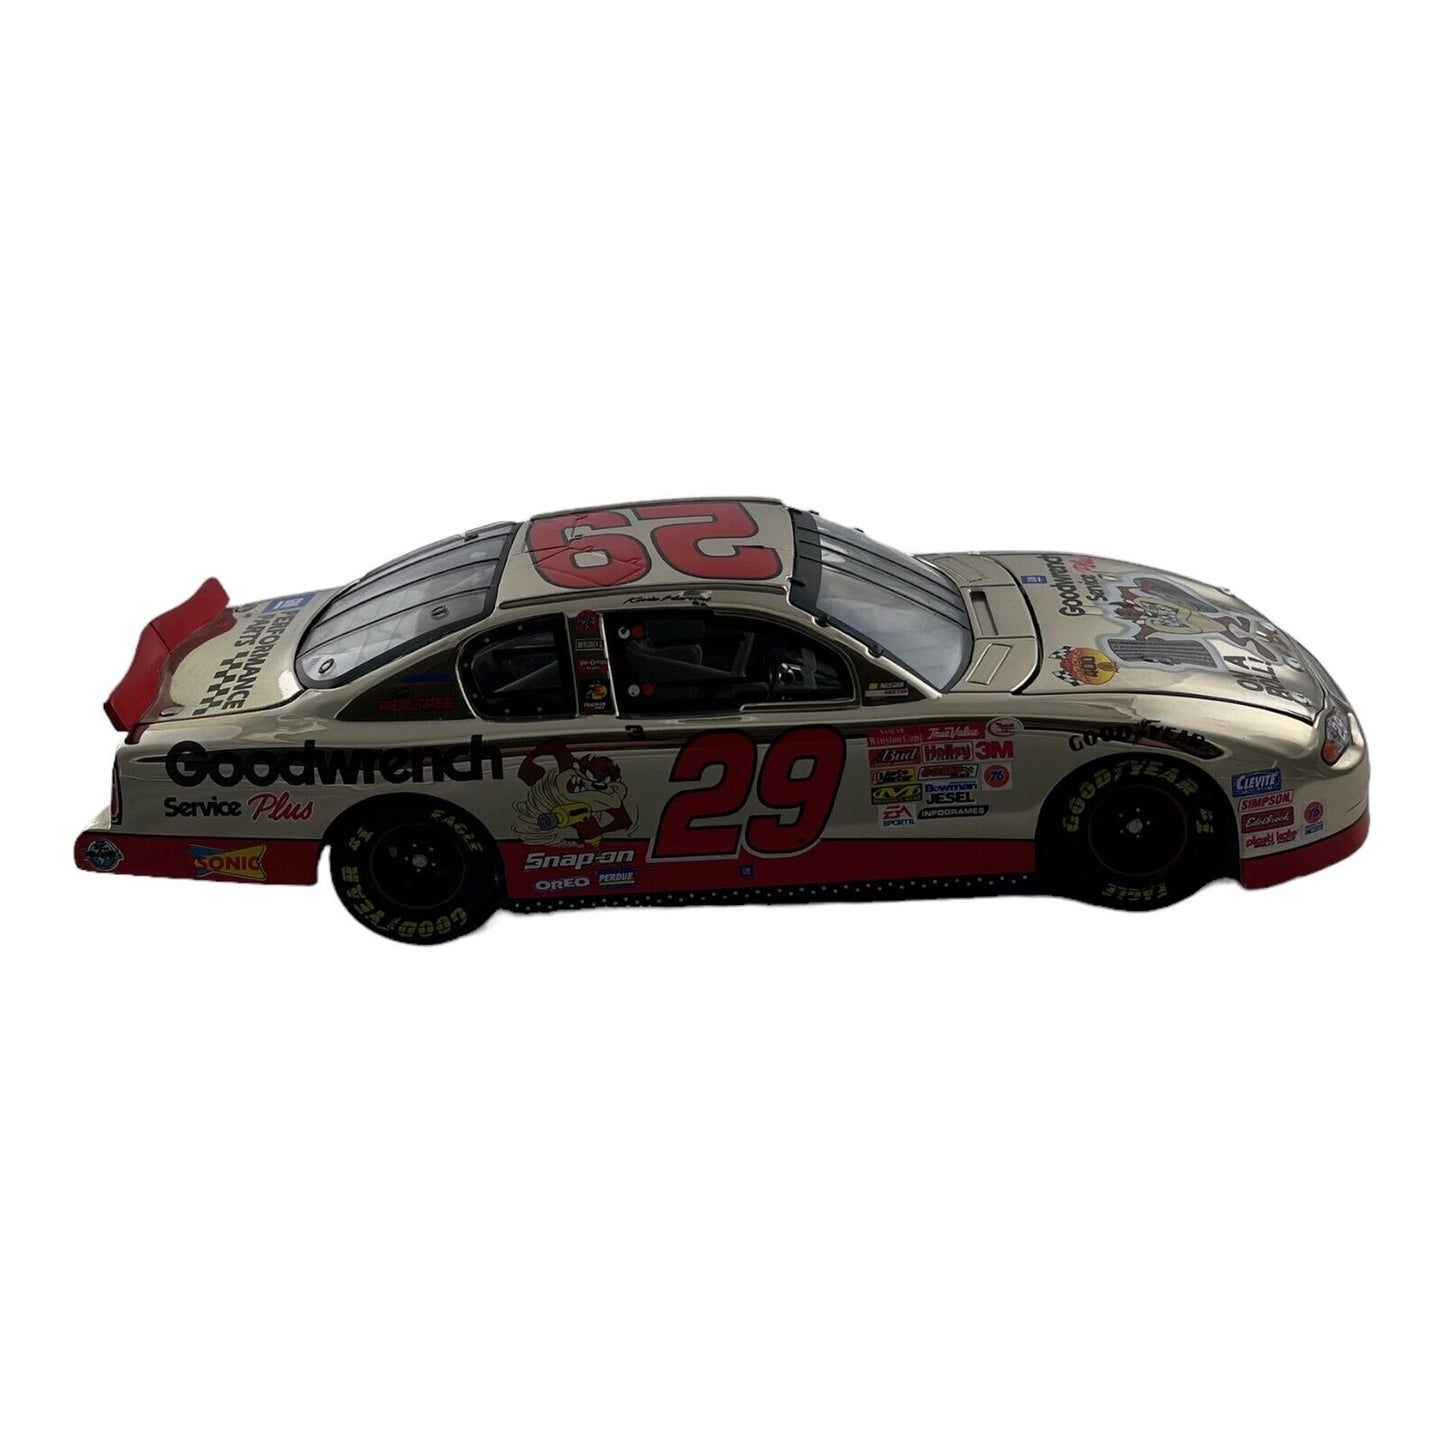 1:24 Scale Kevin Harvick #29 Goodwrench Looney Tunes White Gold Diecast Vehicle